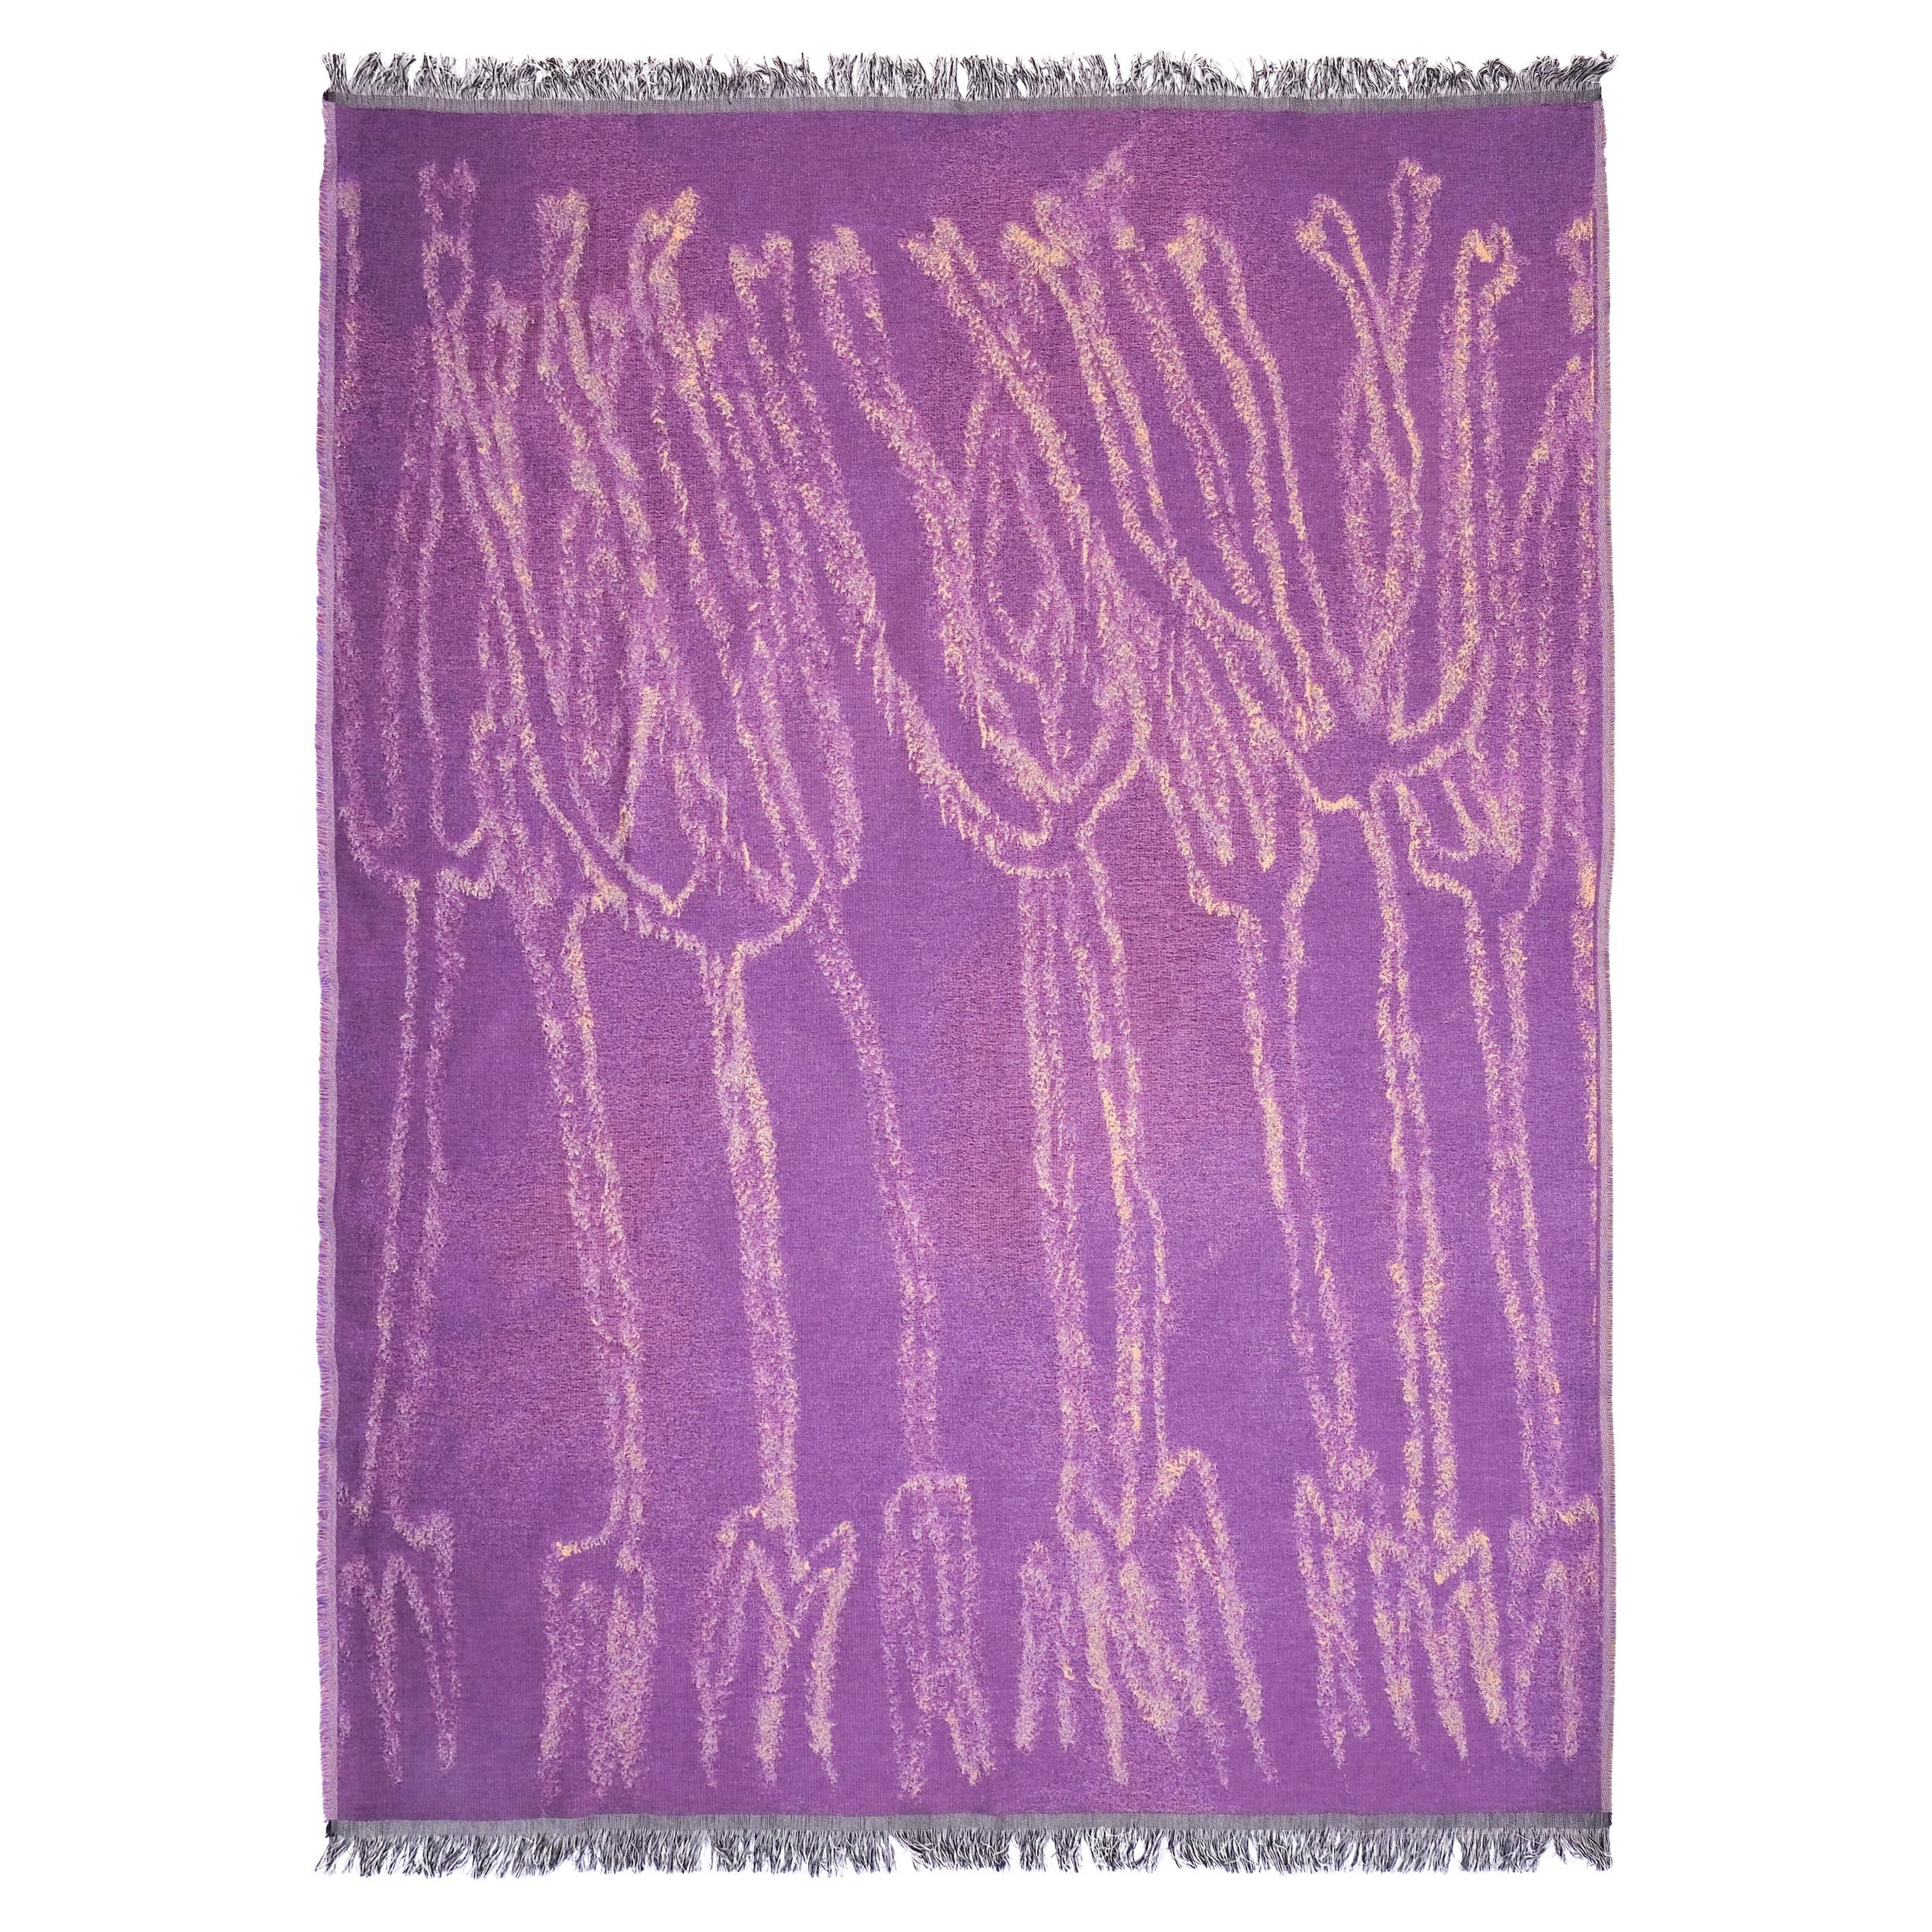 Violet Blanket Mysteries of the Roots For Sale